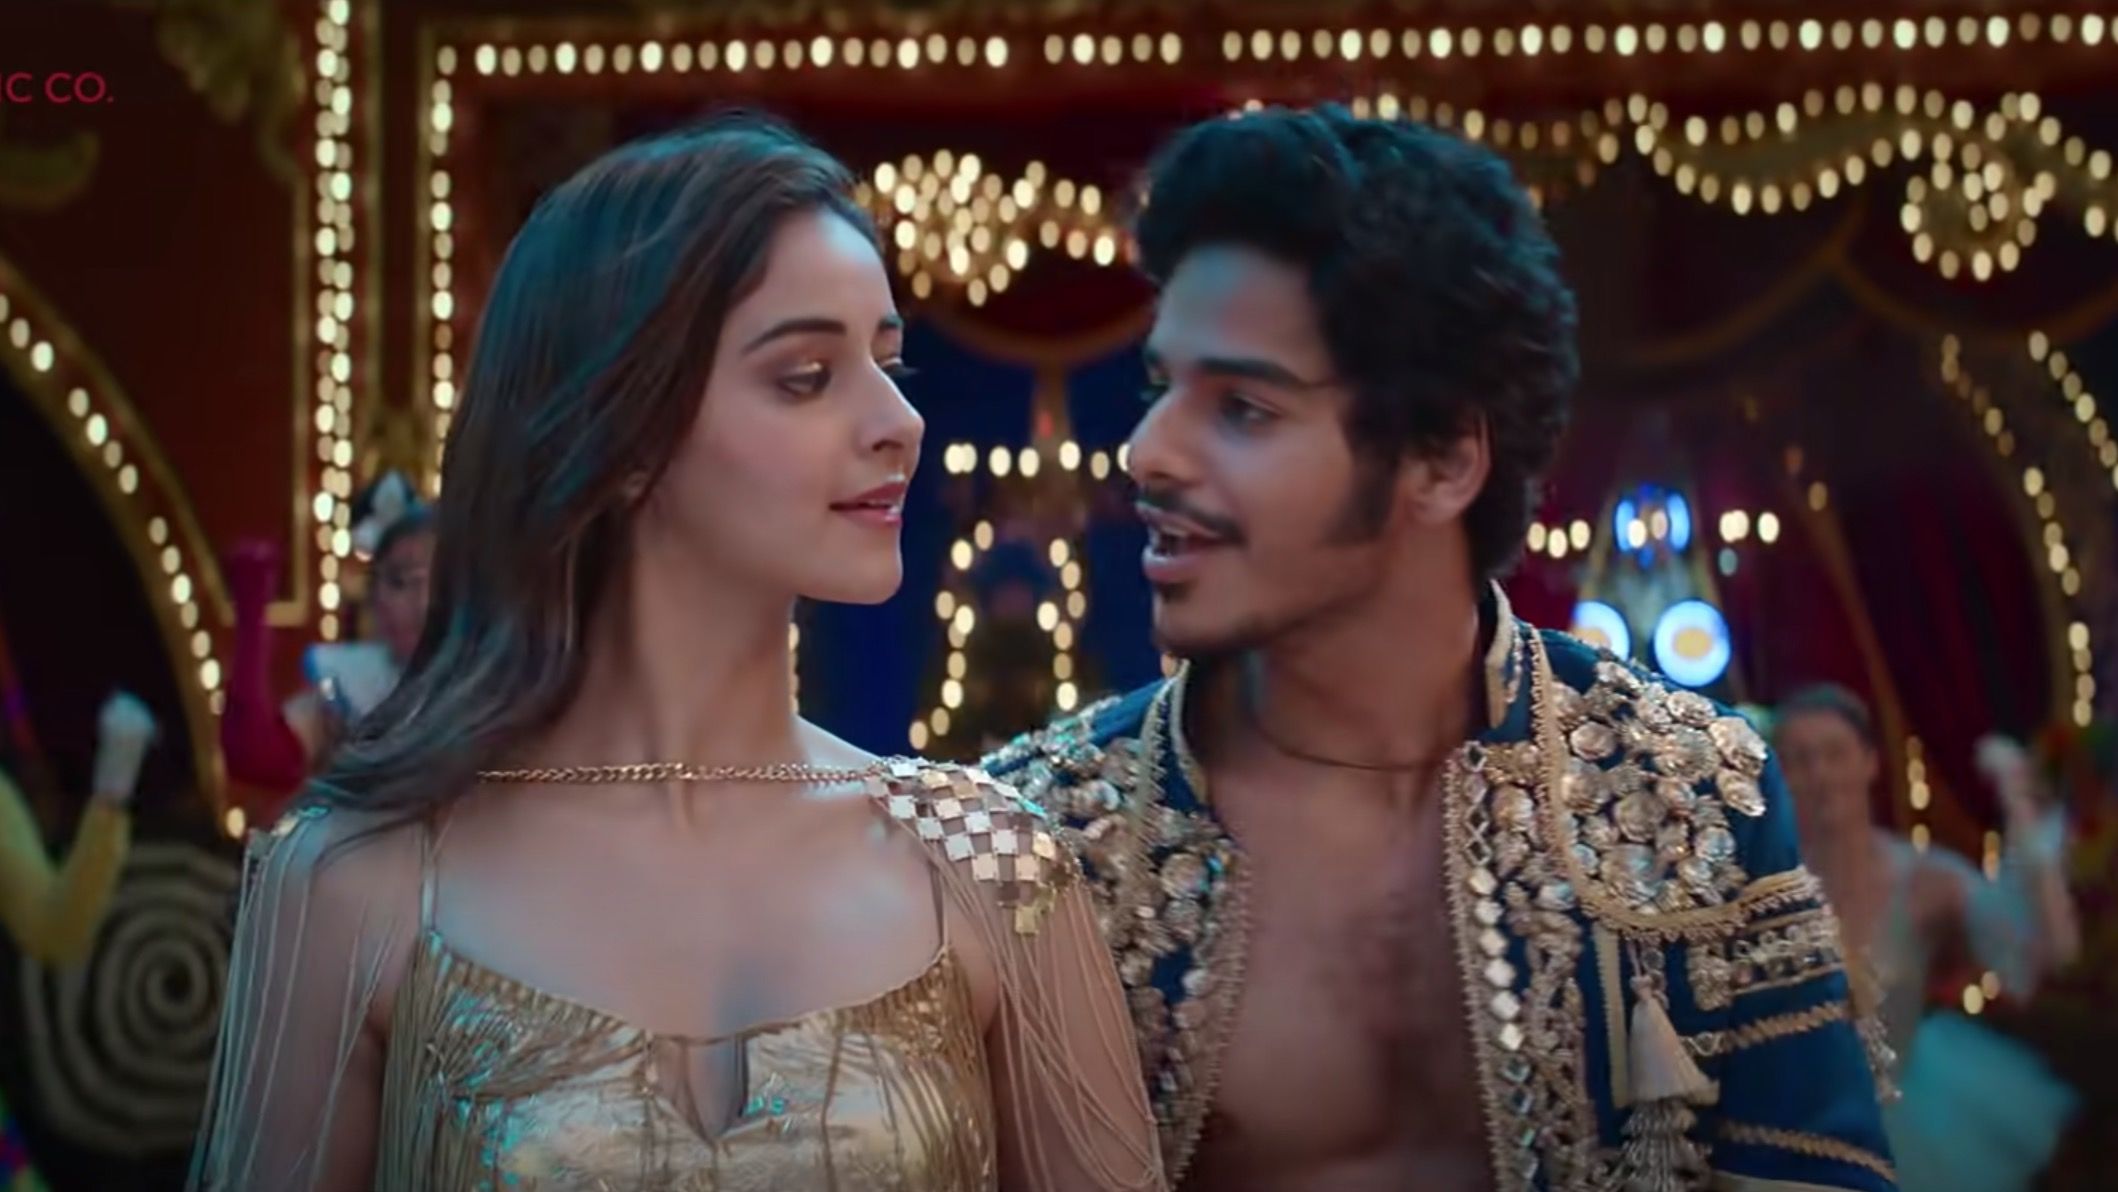 The song, starring Ananya Panday and Ishaan Khattar, is featured in the upcoming film "Khaali Peeli."